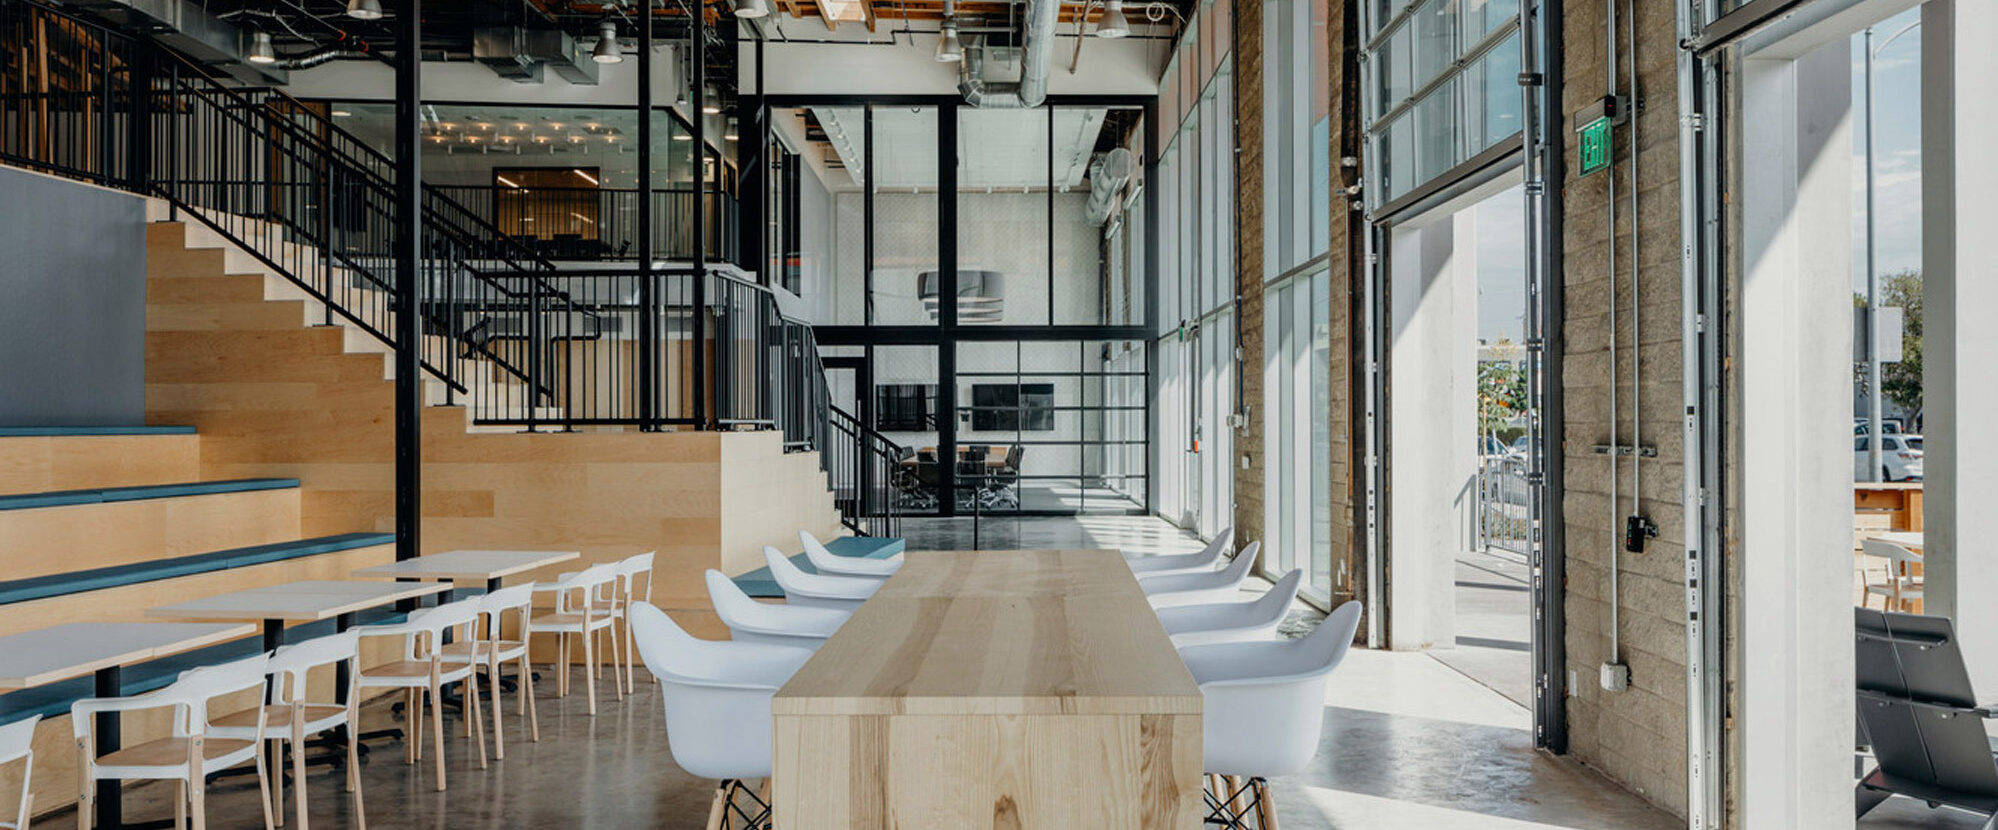 Spacious modern industrial office with high ceilings, exposed ductwork, and a mix of natural wood elements. Minimalist furniture includes sleek white tables and streamlined wood benches. Large windows provide ample natural light, complementing the warm wooden flooring and staircase.